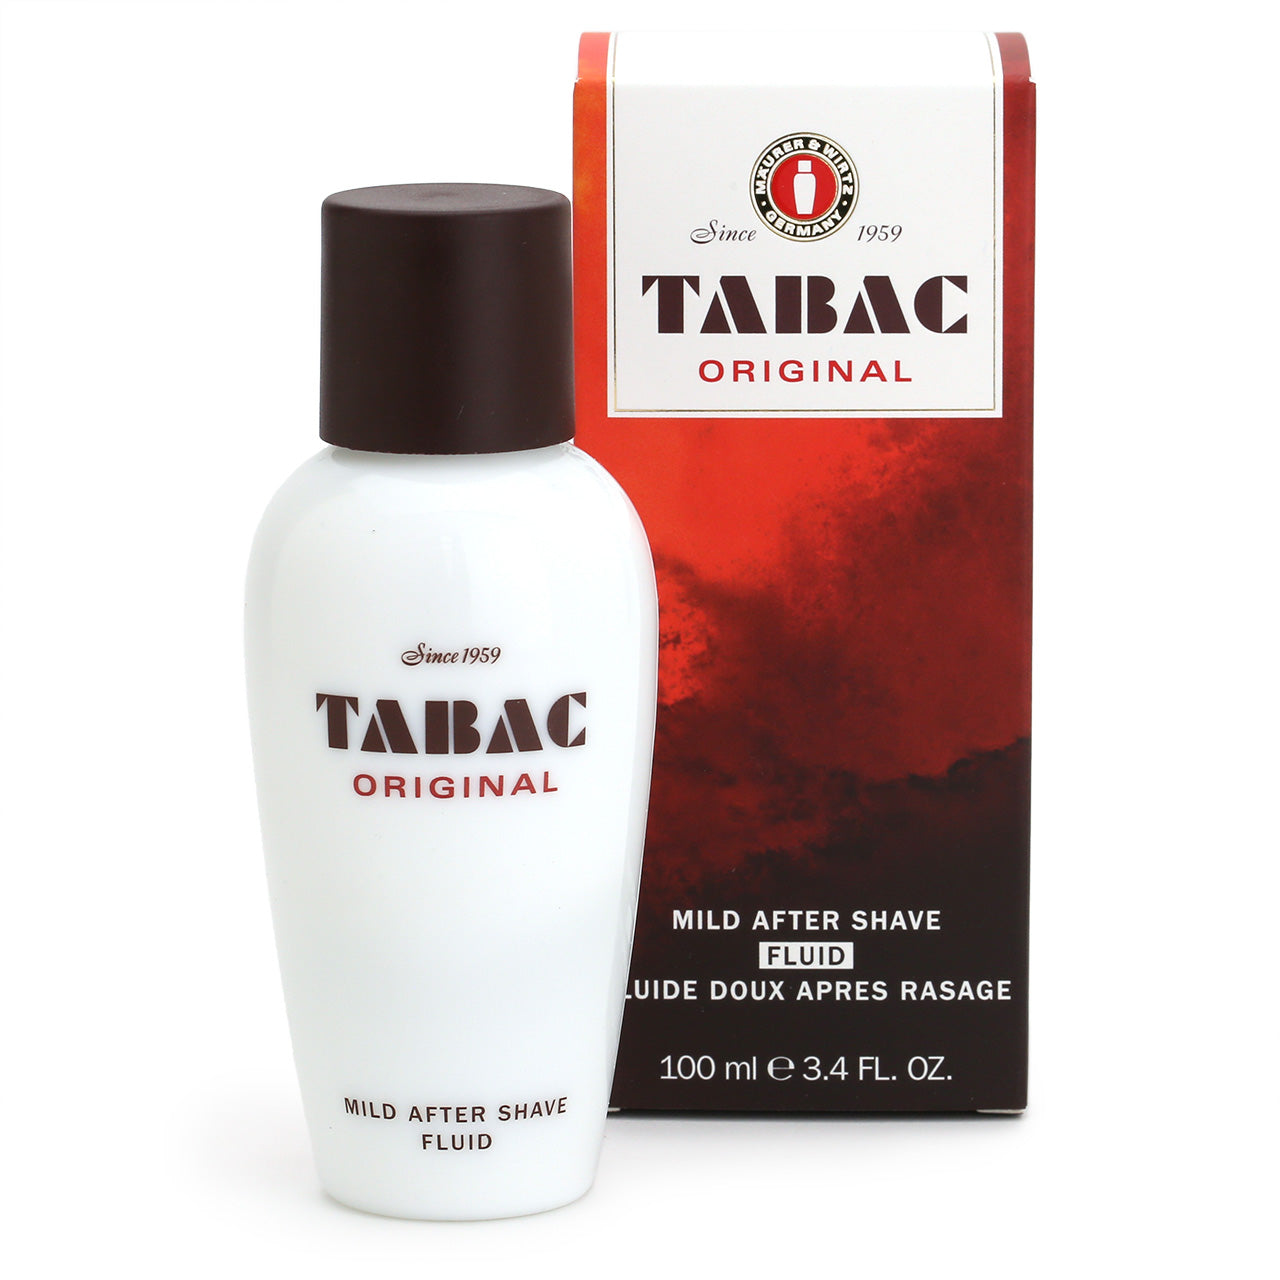 Tabac Mild Fluid After Shave 100ml in white glass bottle with box.